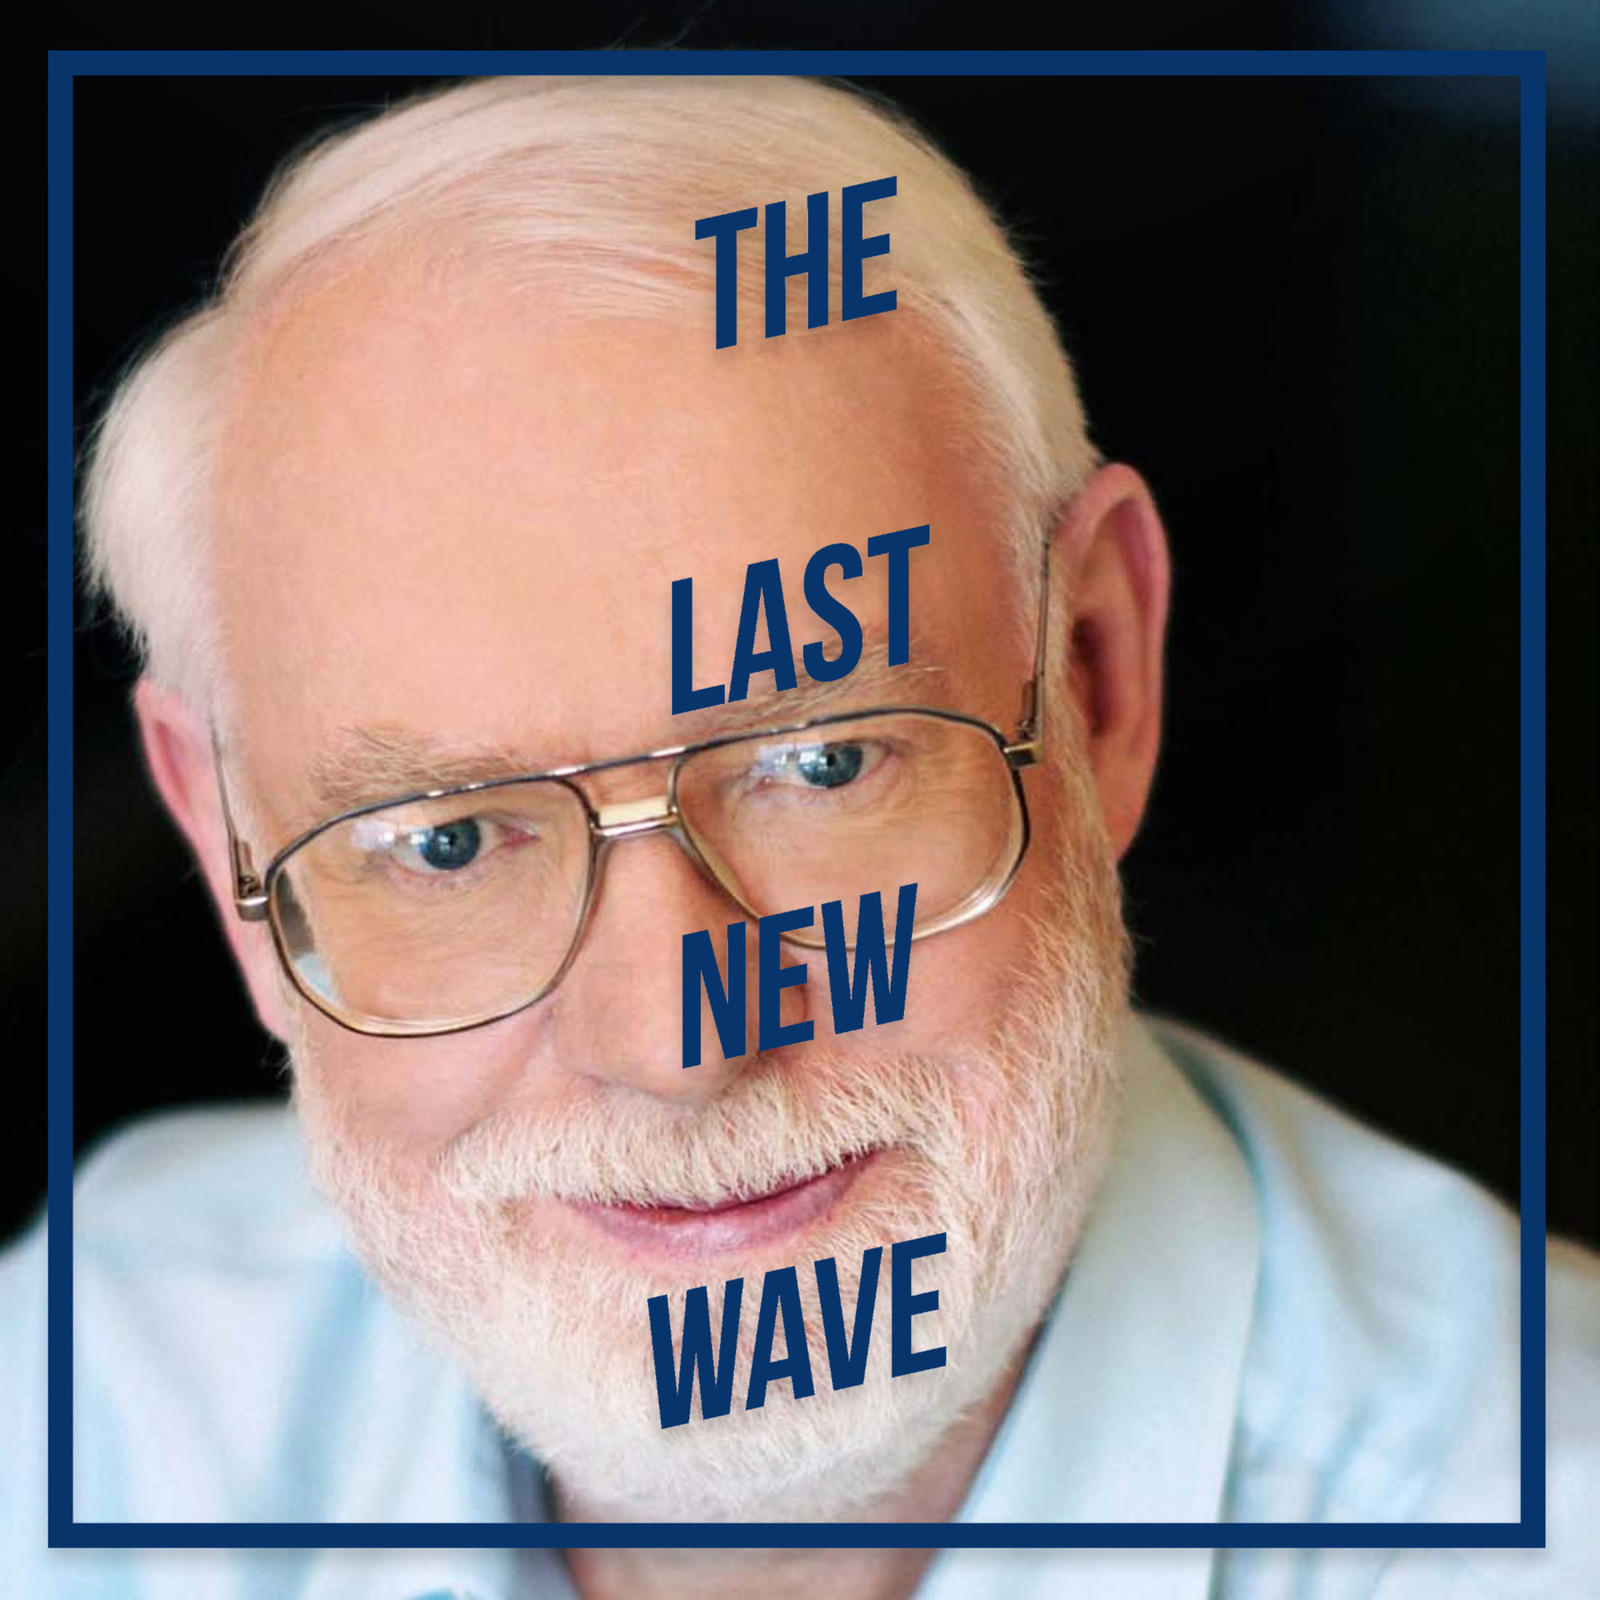 David Stratton - A Cinematic Life Interview with David Stratton - The Last New Wave